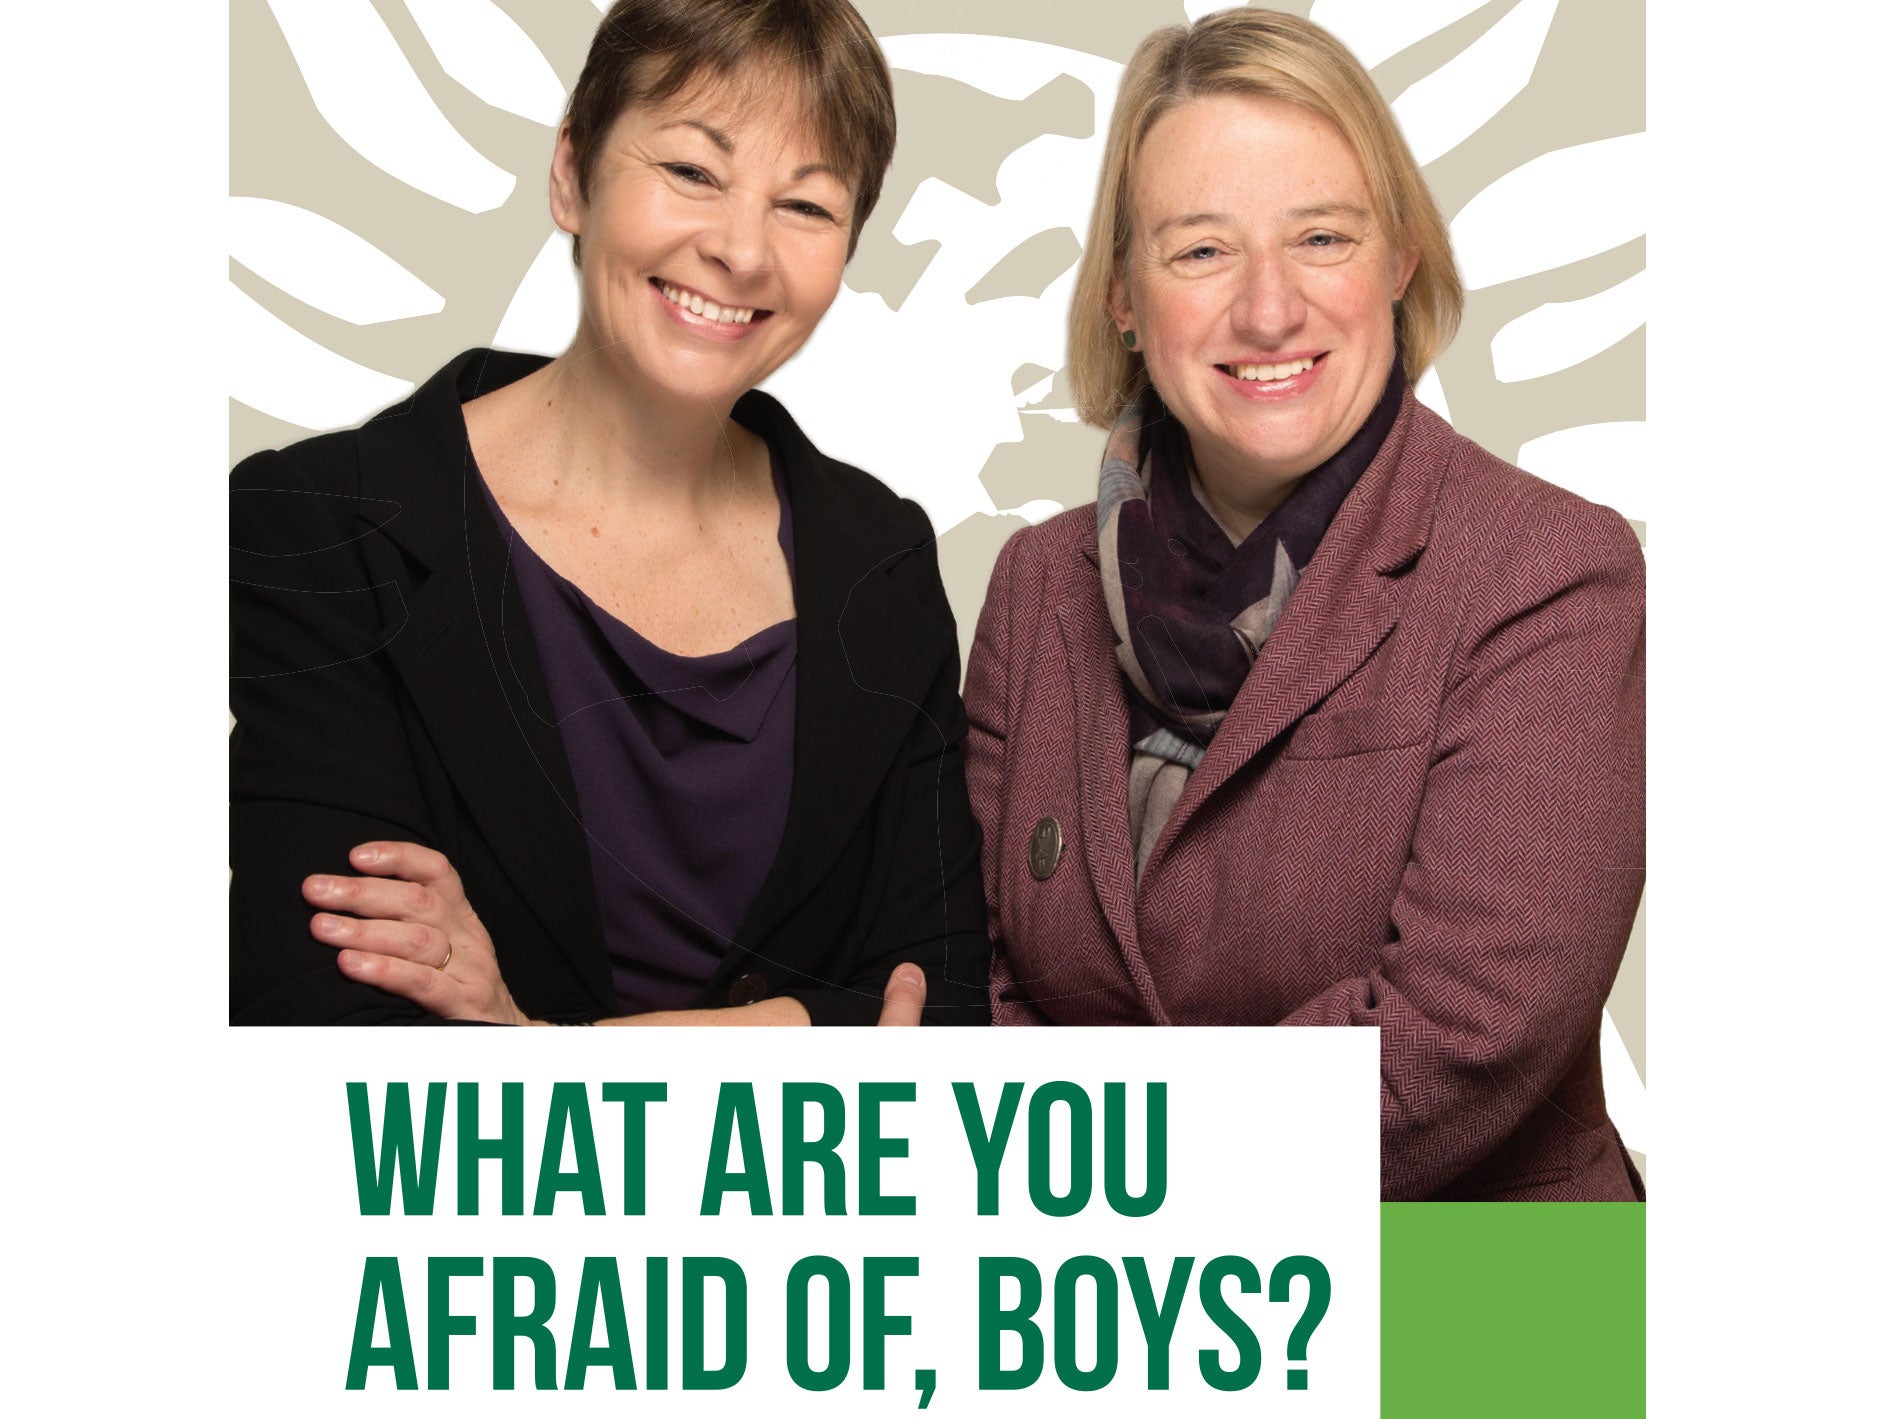 The Green Party asks: What are you afraid of boys?